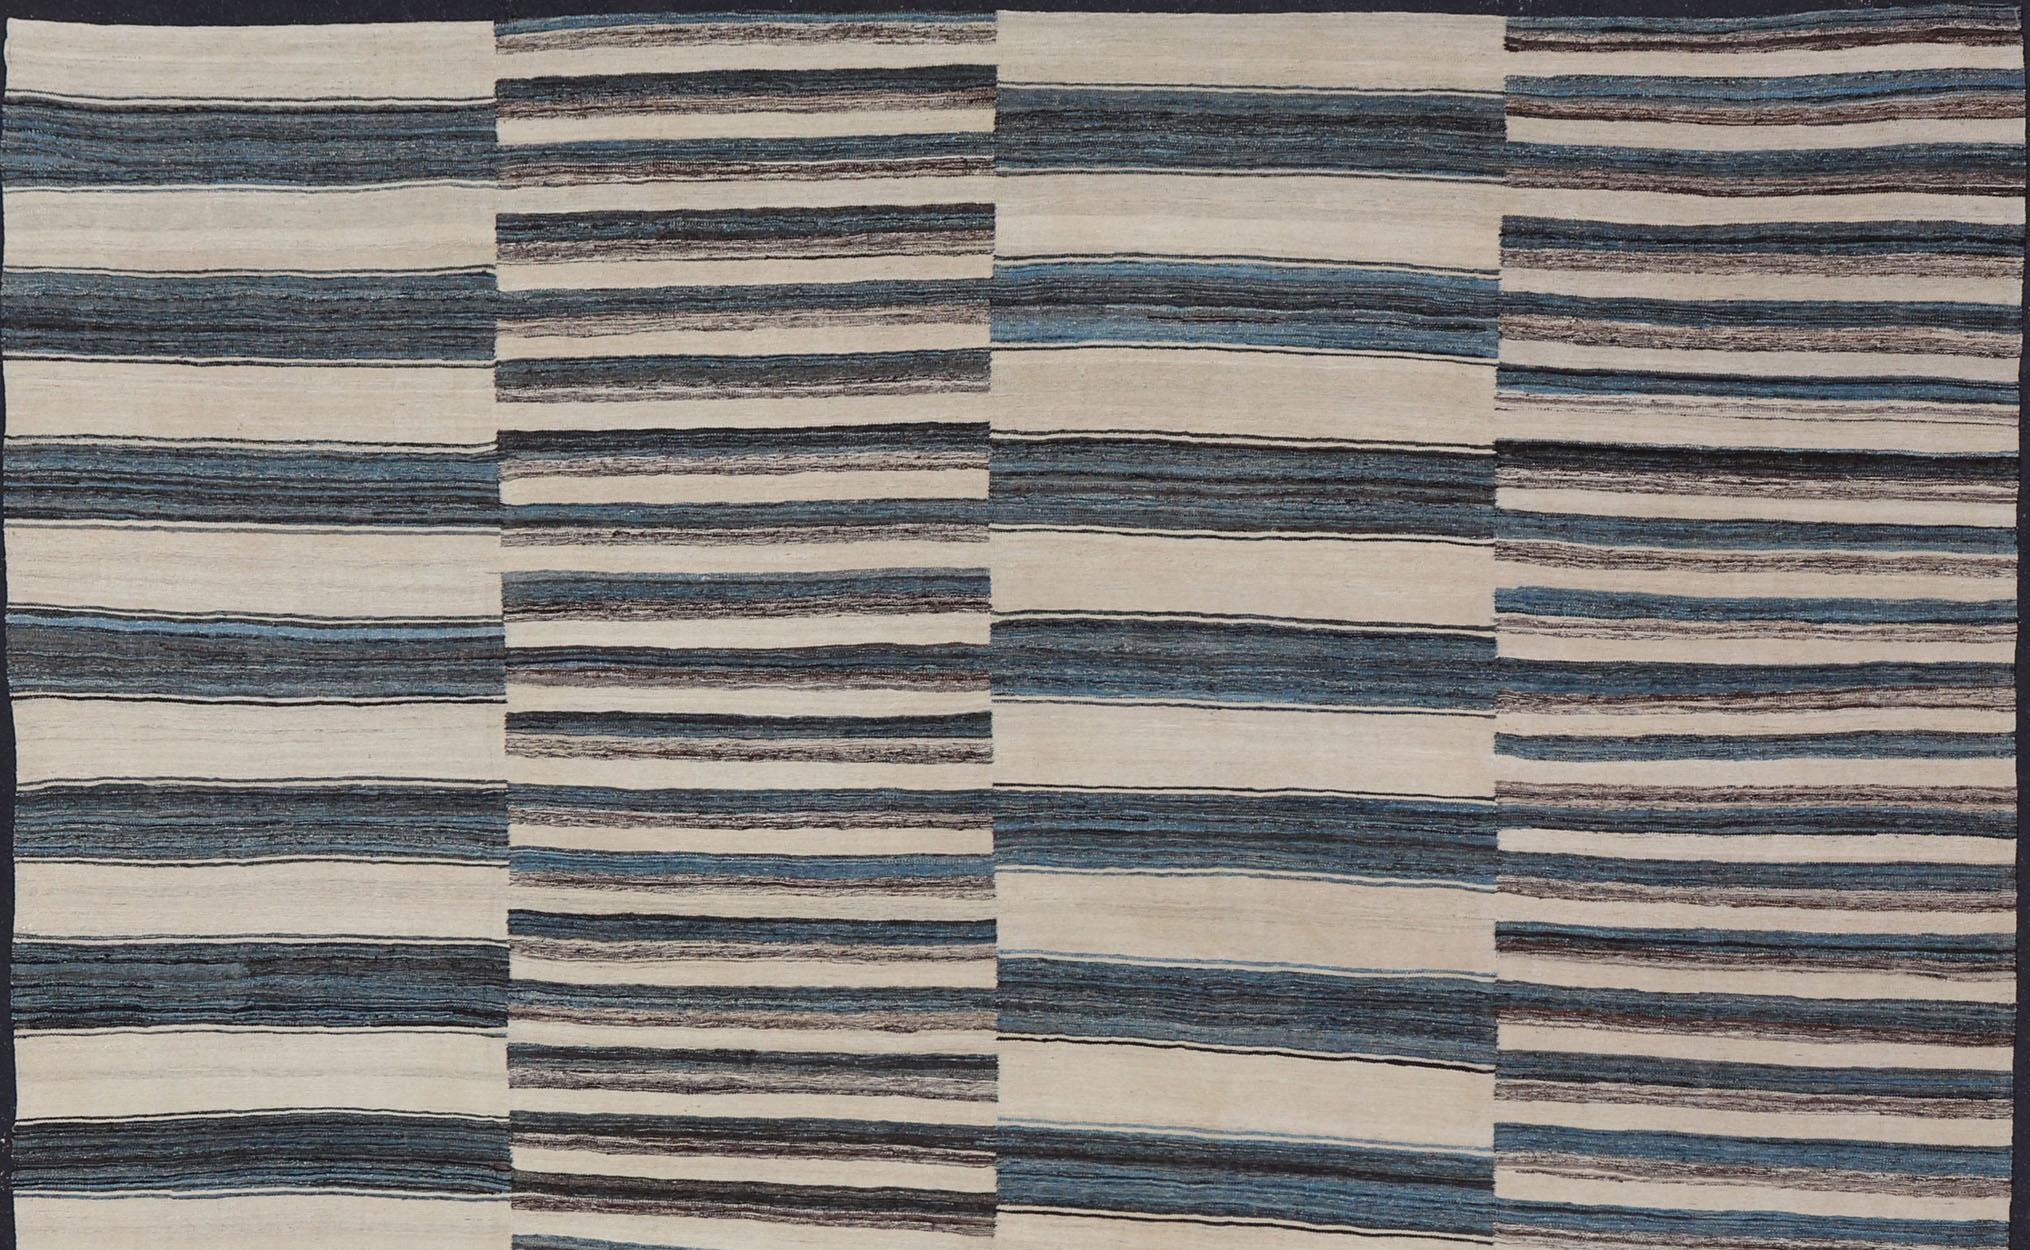 Modern flat-weave Kilim rug with stripes in shades of light blue, charcoal, blue, cream. Rug AFG-60, Keivan Woven Arts / country of origin / type: Afghanistan / Kilim

This flat-woven Kilim rug features a Classic stripe design that places